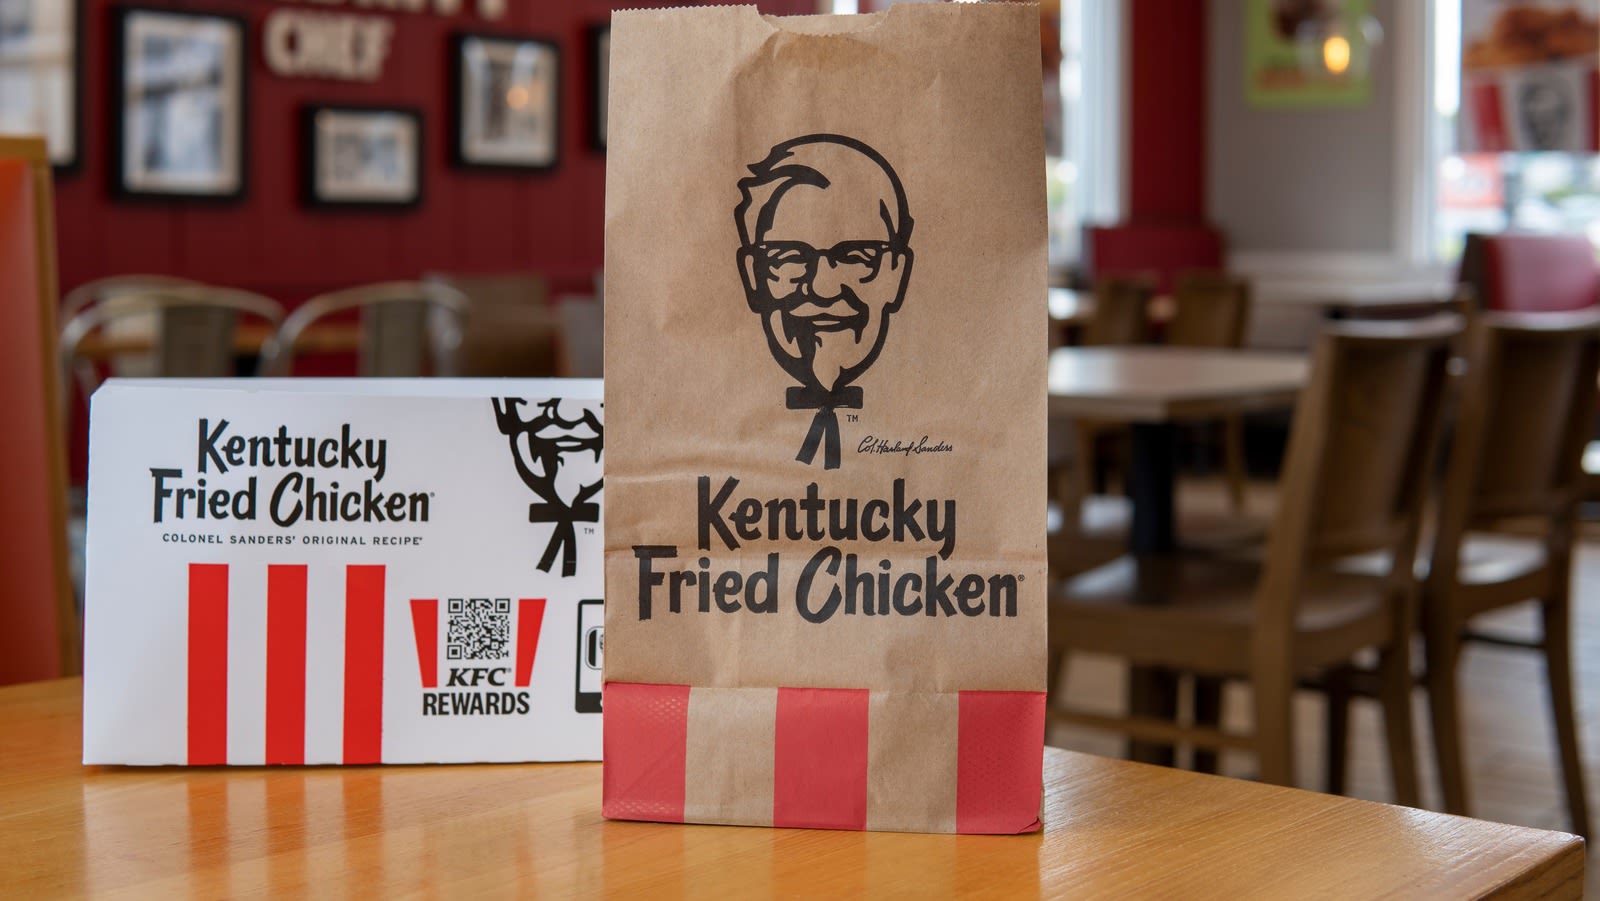 8 KFC Menu Items From The 1980s You Probably Forgot About